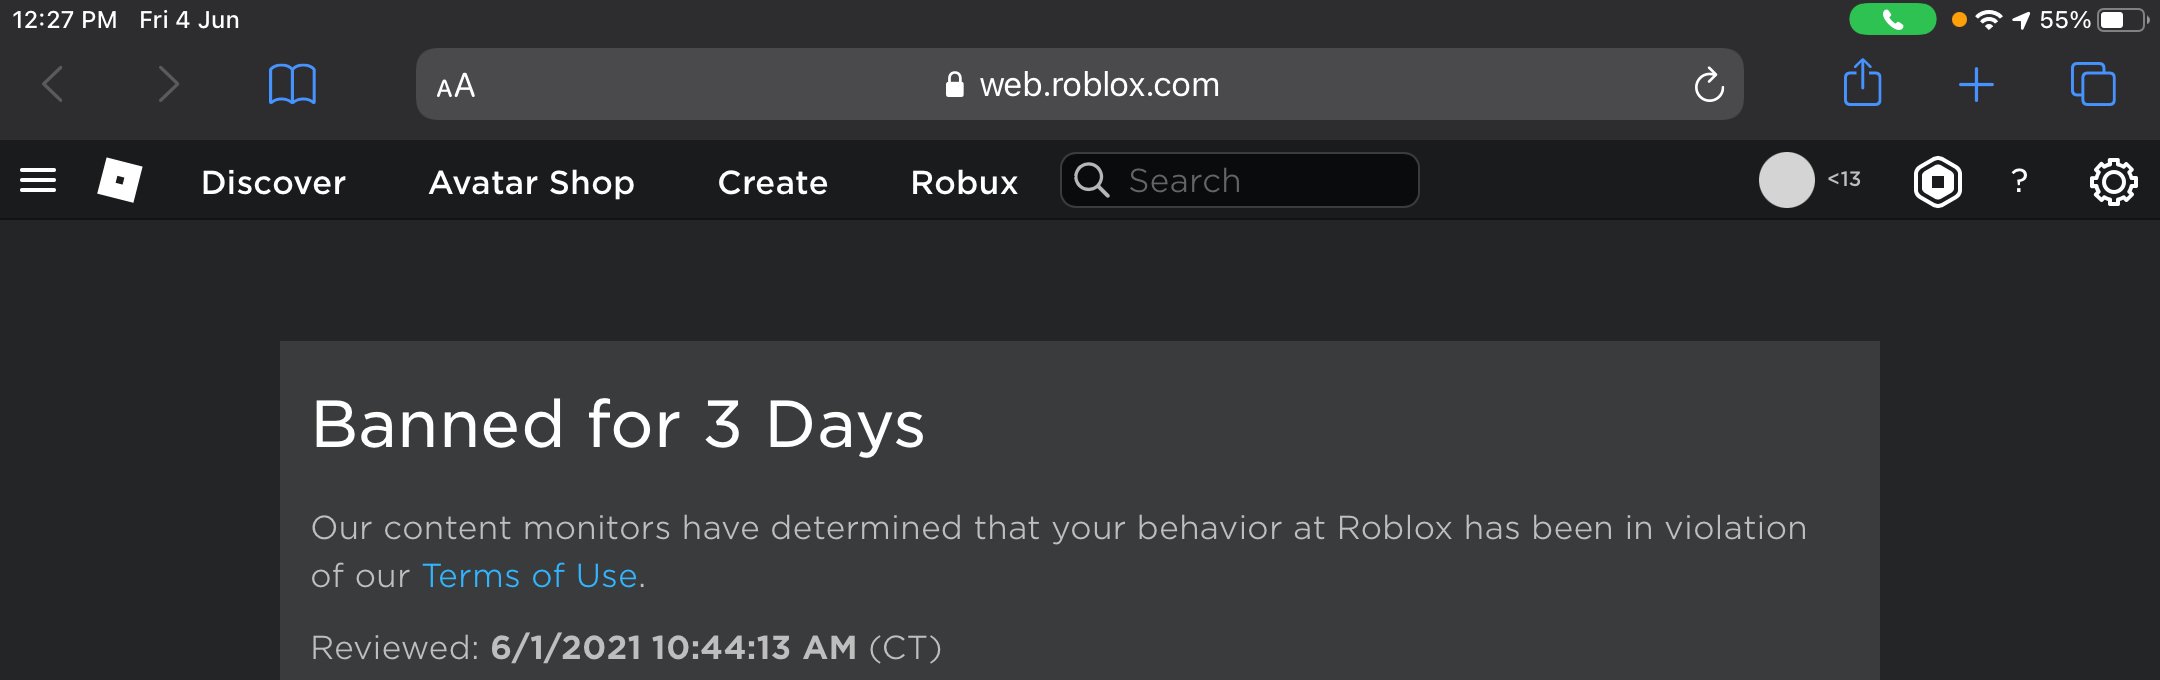 Roblox complaint Not logging in my account after unban